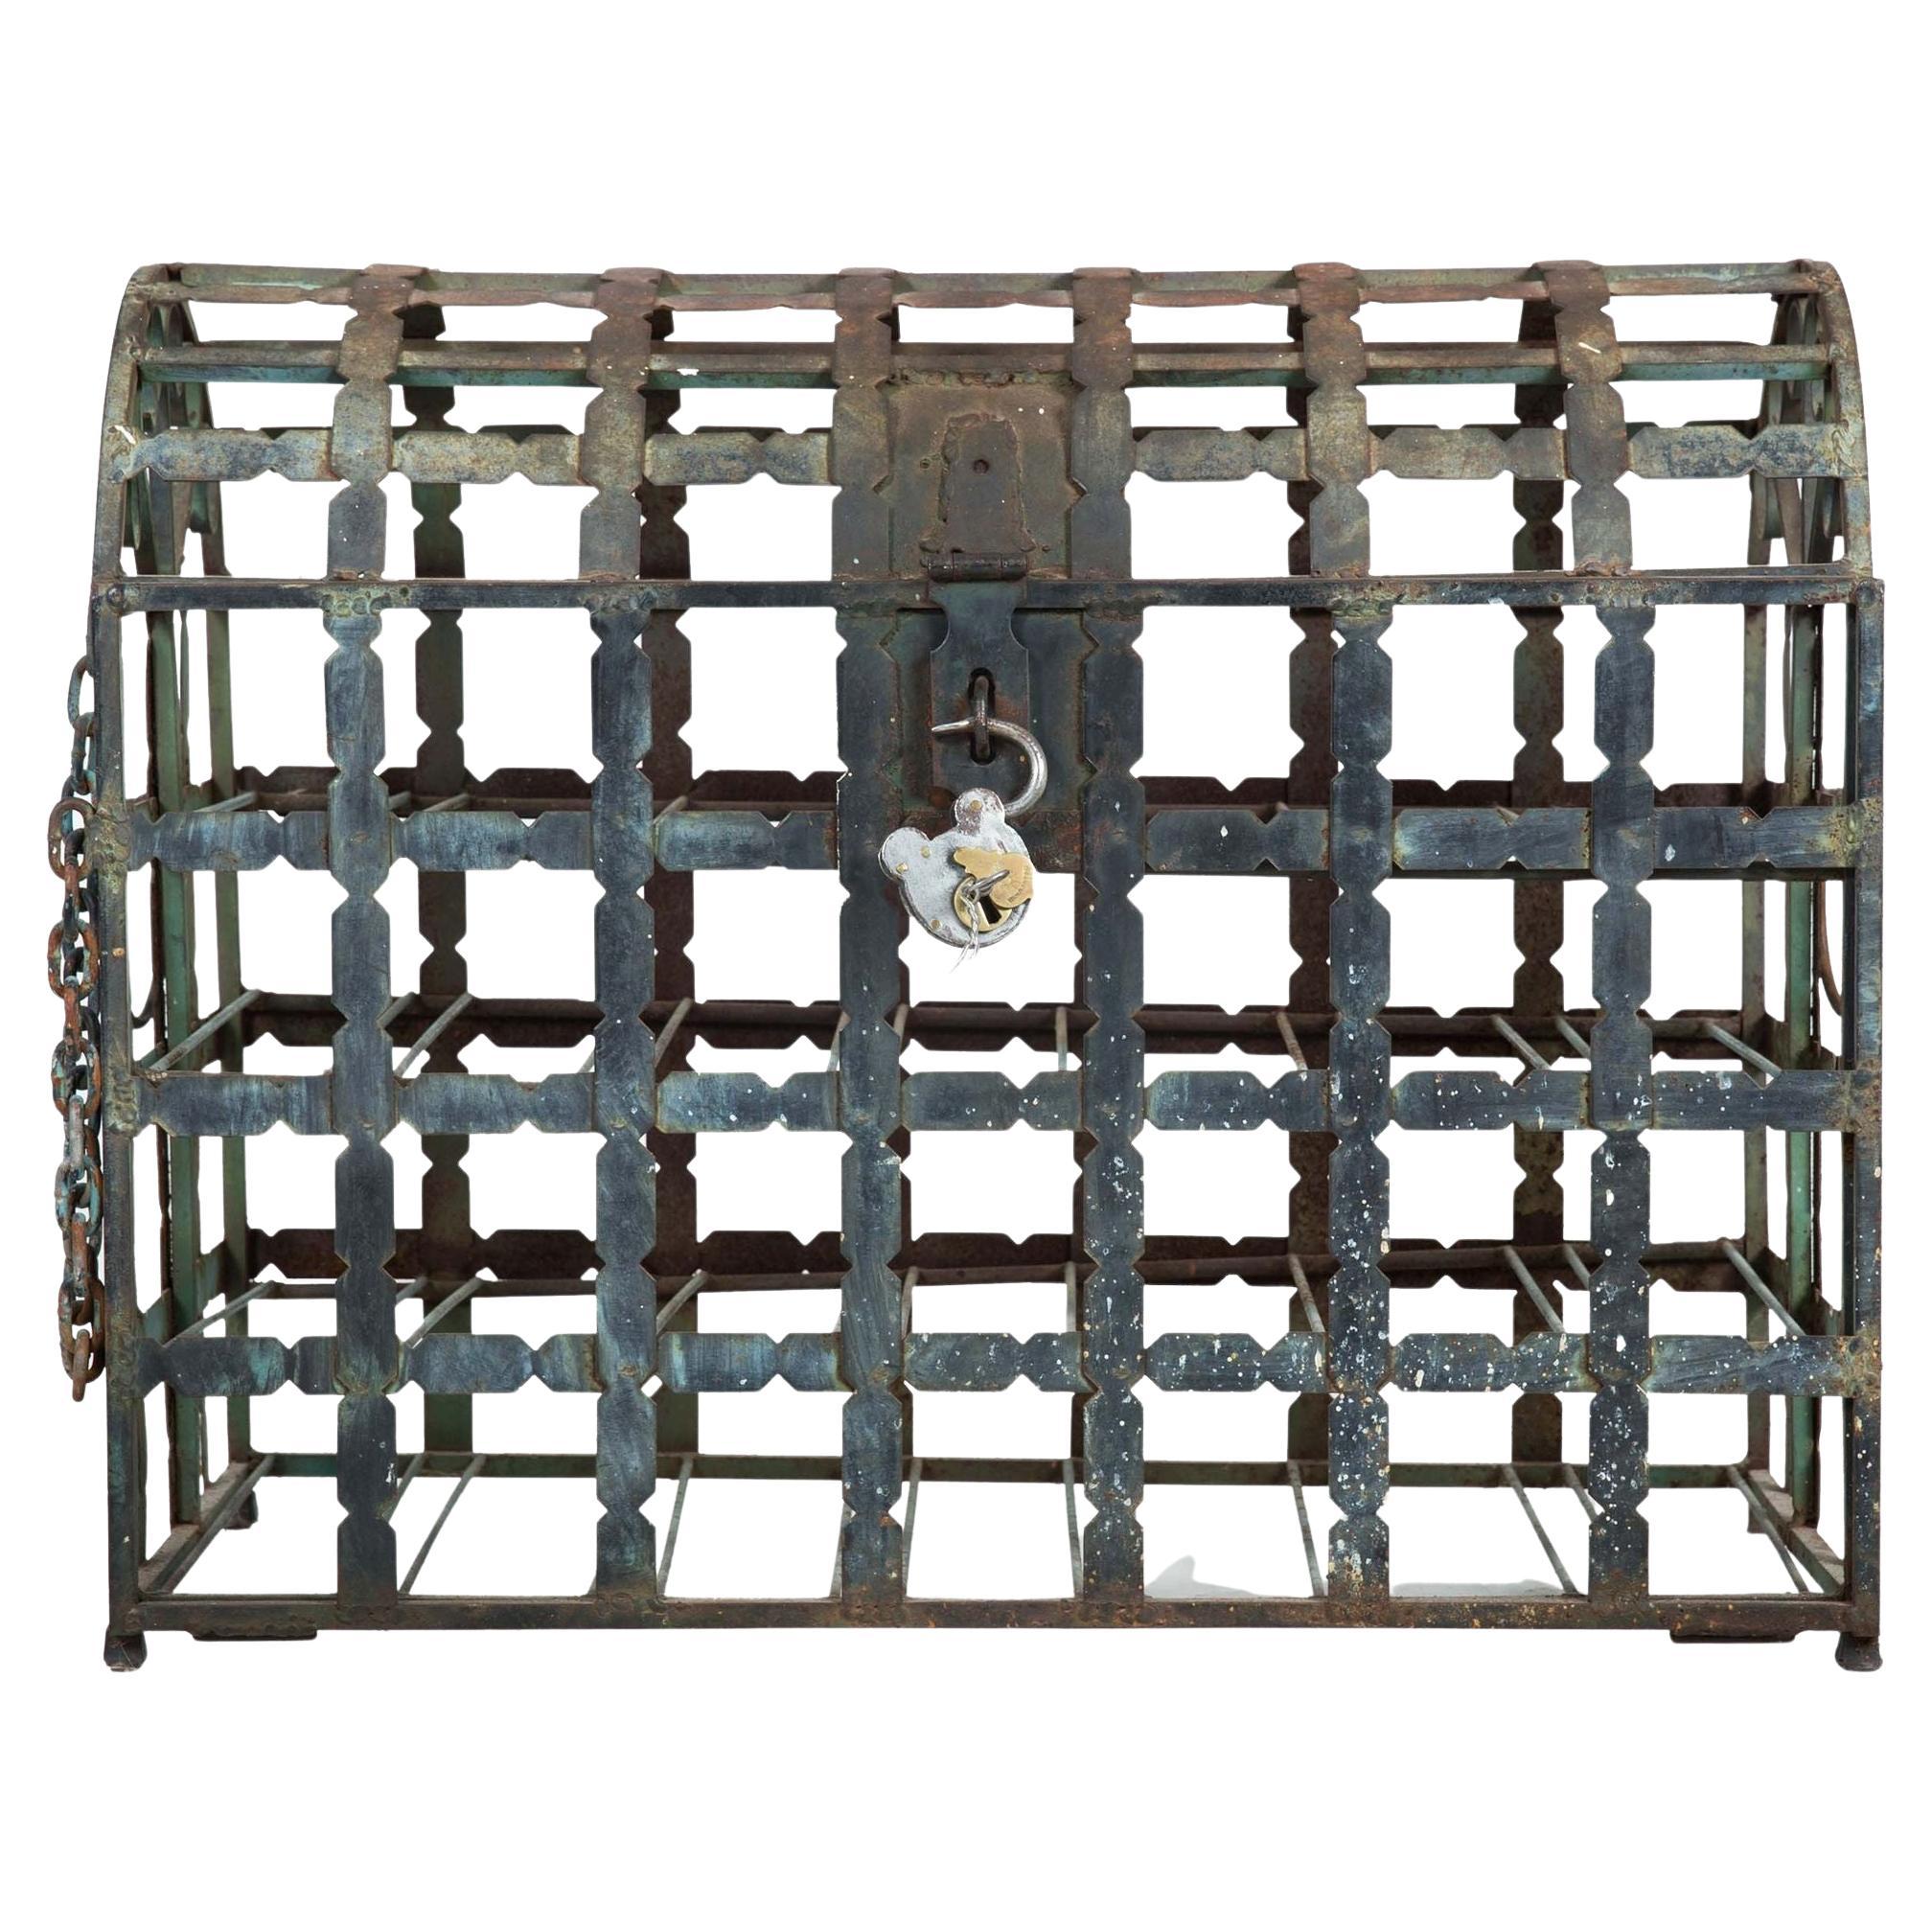 Antique French Wrought Iron Chest Wine Storage Rack for 28 Bottles